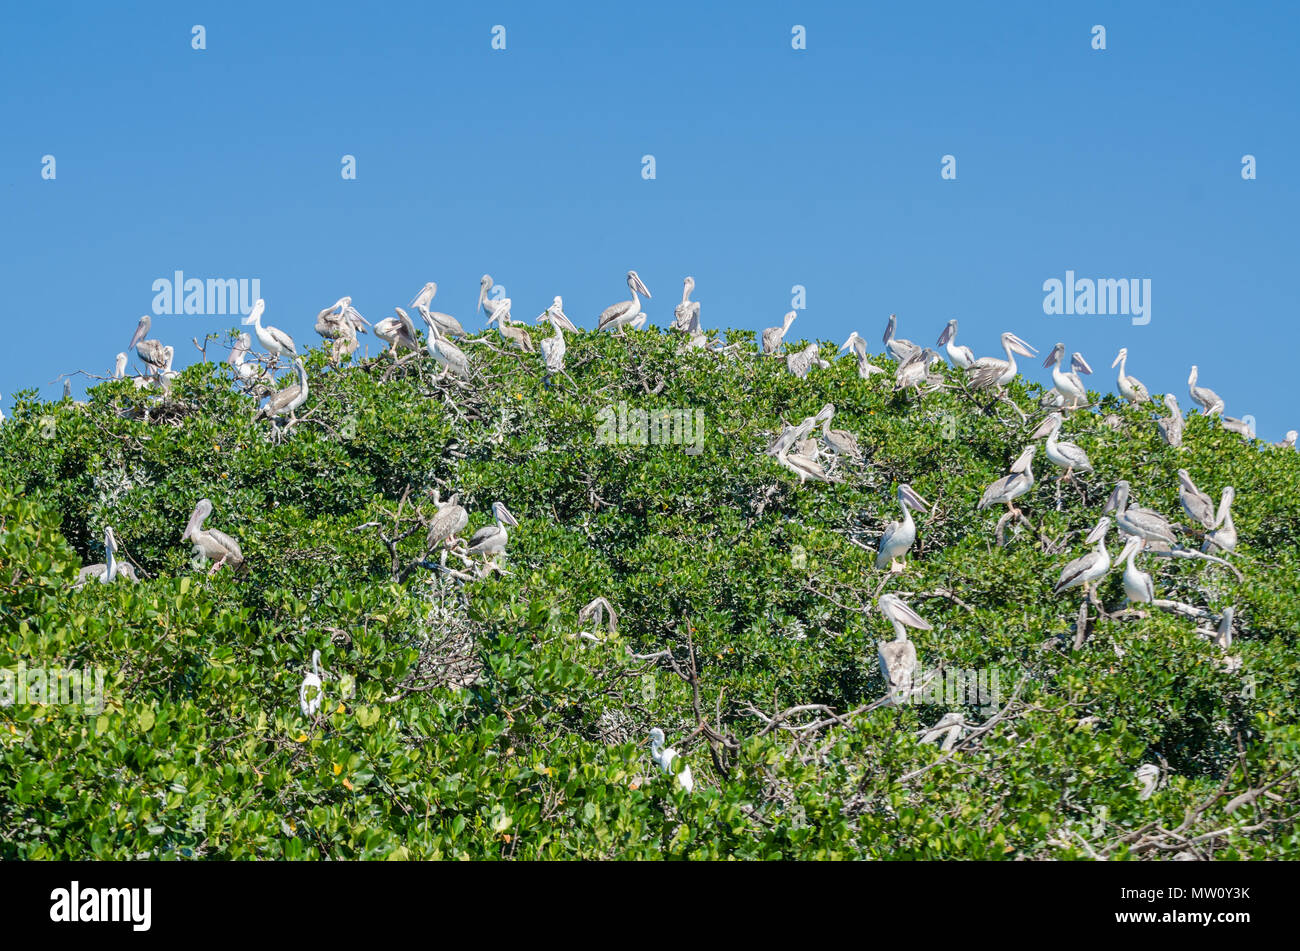 Many pelicans sitting in top of mangrove trees on Pelican Island, Casamance, Senegal, Africa. Stock Photo